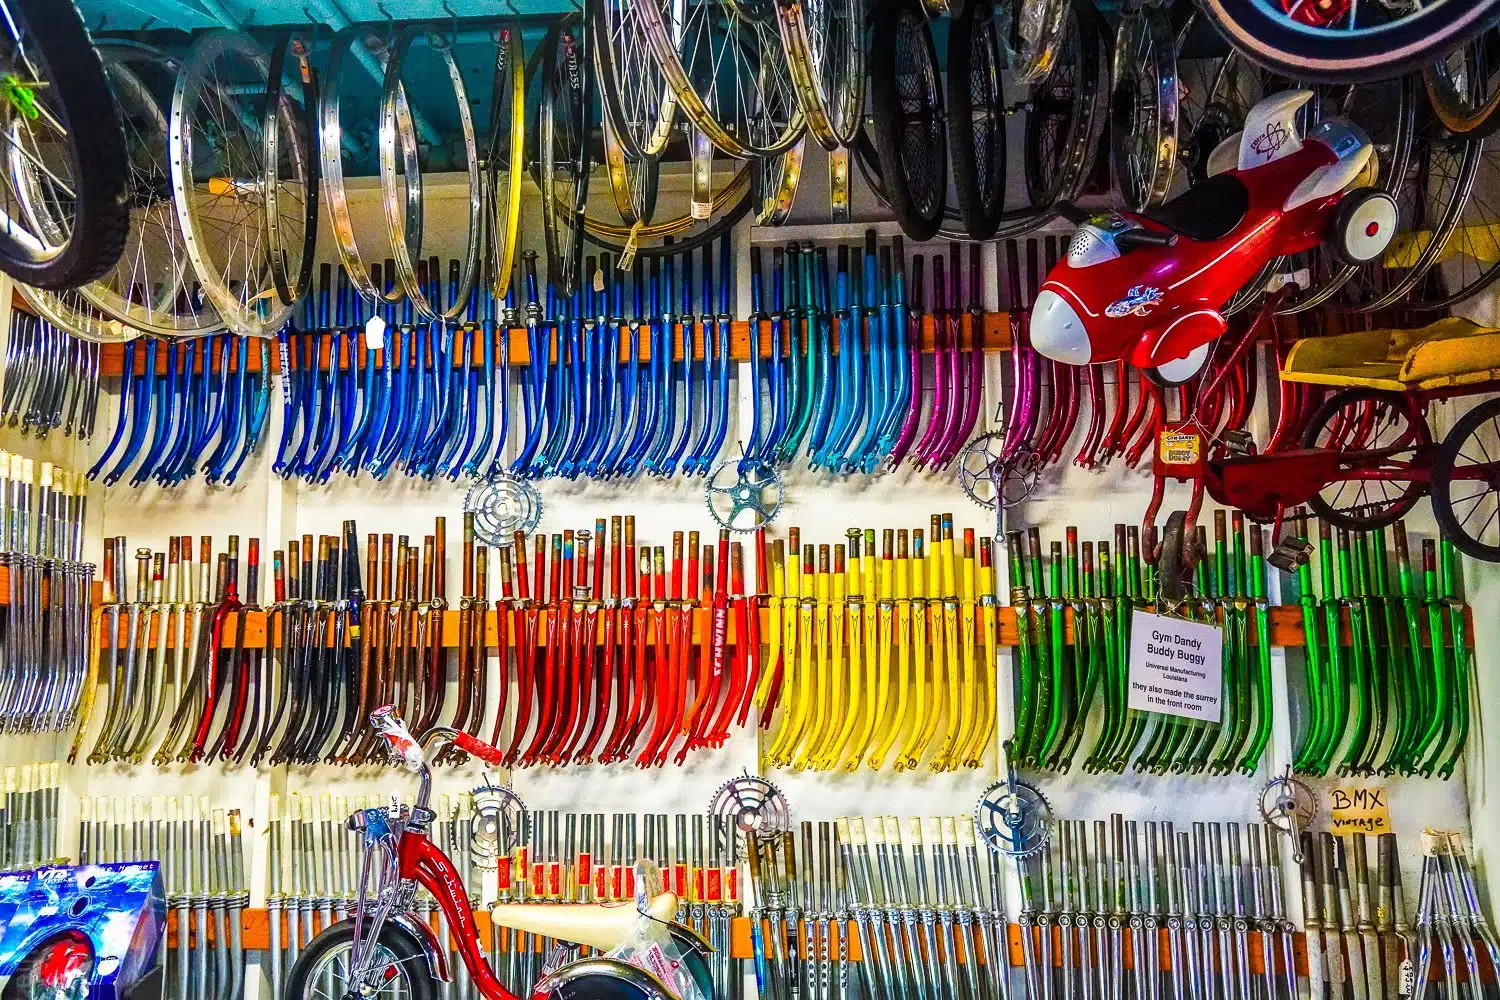 Bike parts in candy colors.